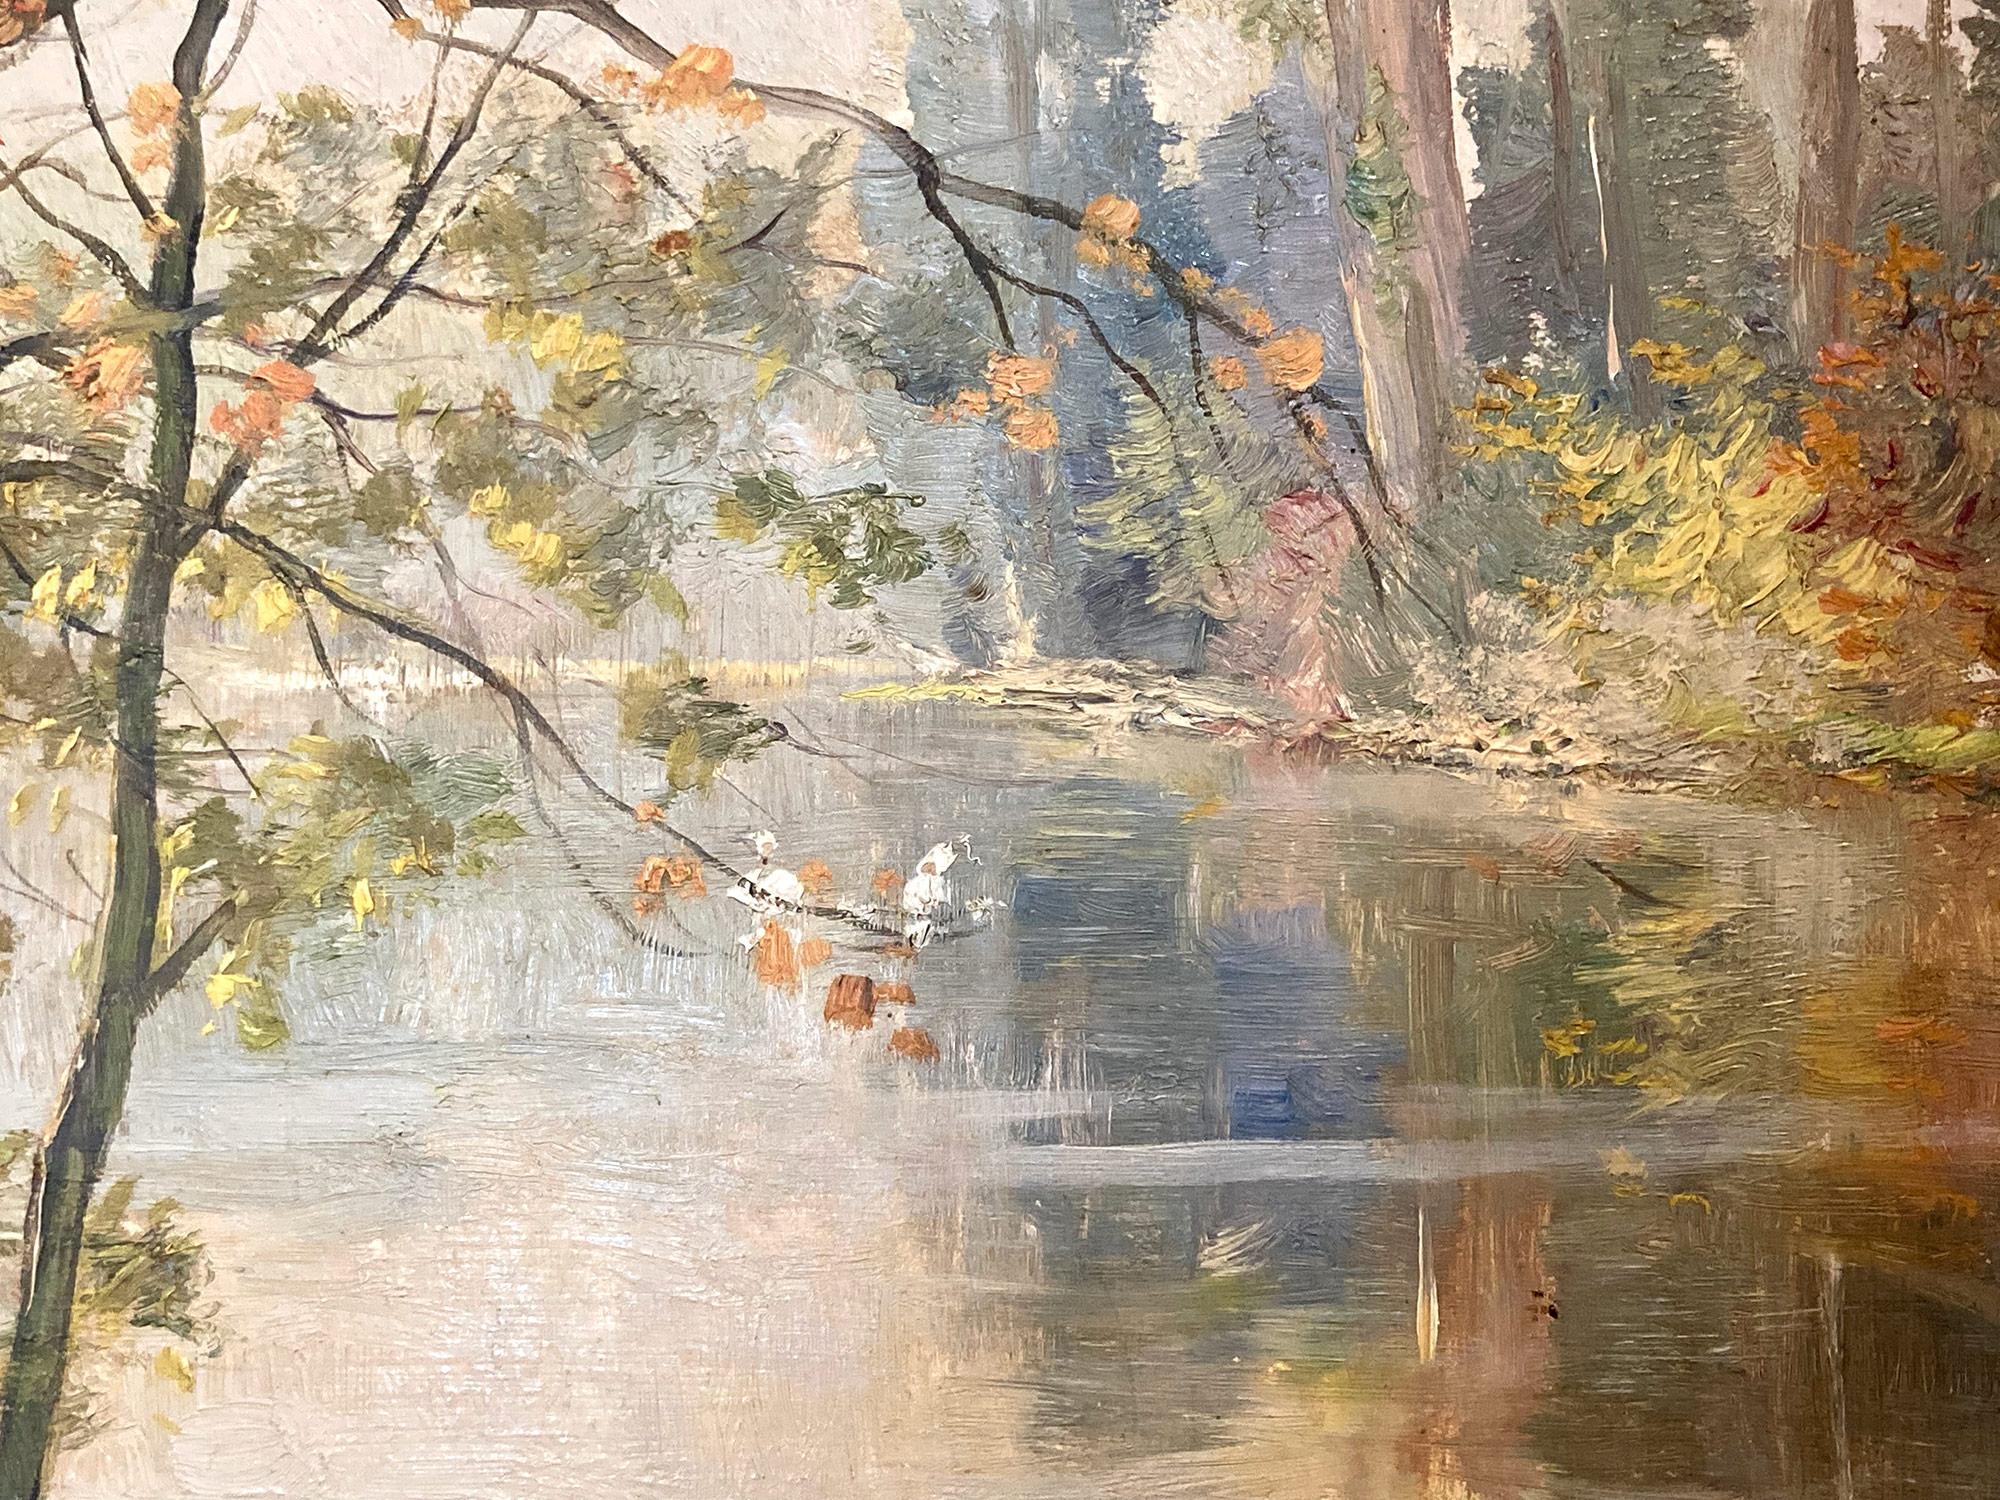 A whimsical oil painting depicting a lake scene set in autumn. Done in an impressionistic style, we are drawn to the depth of color and thick use of paint. This charming compositions reminds us of such great artists from the impressionist movement.